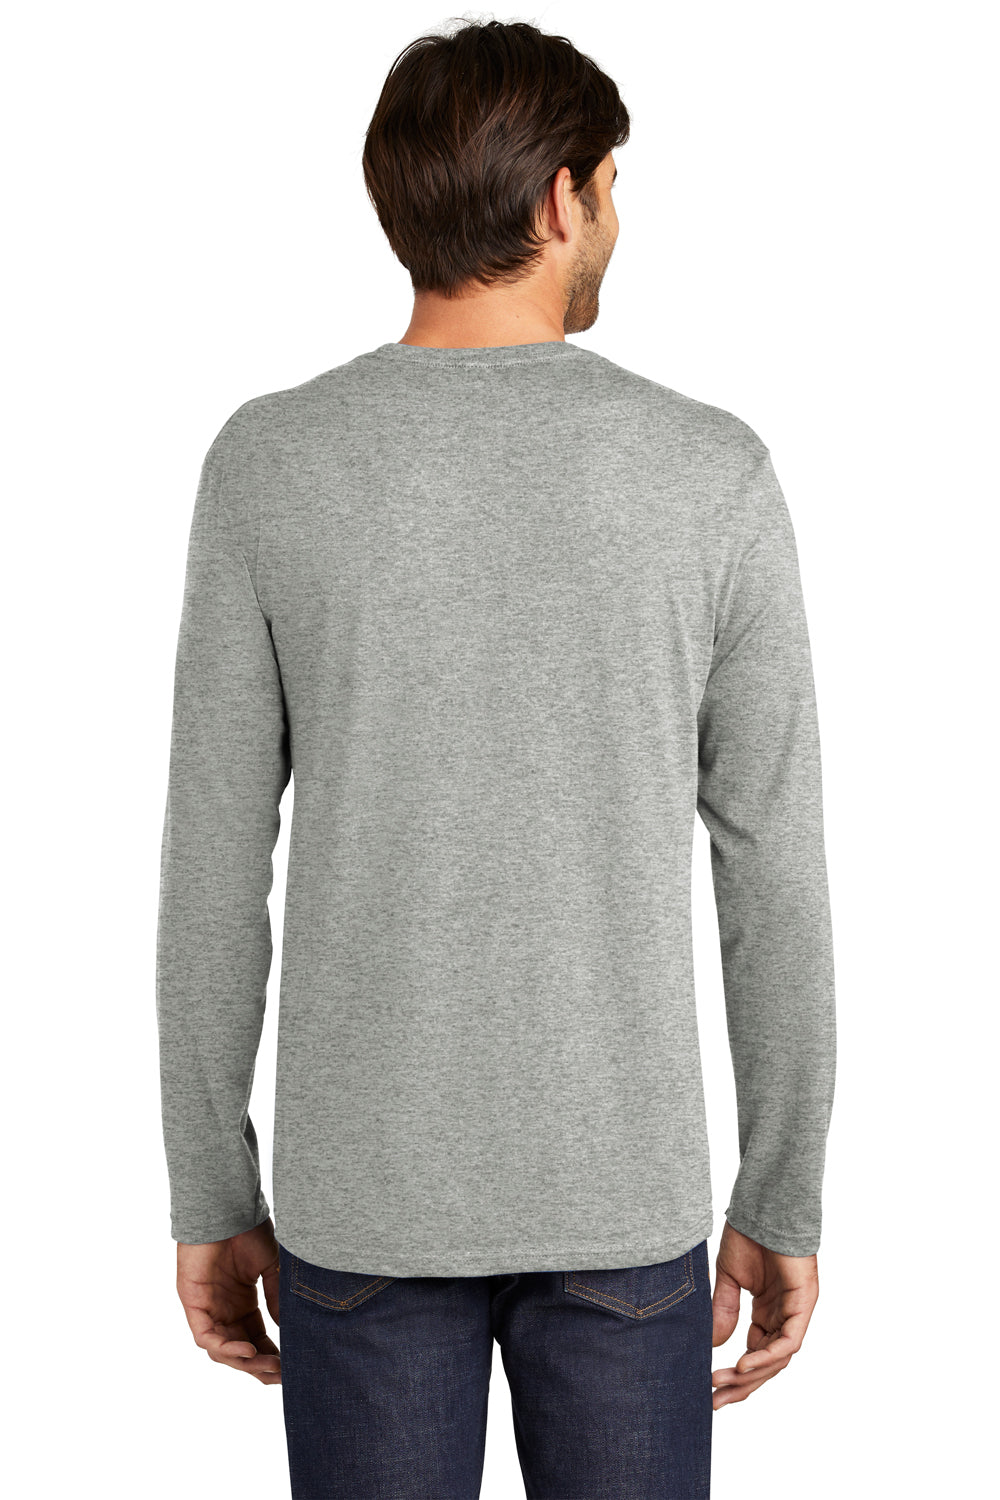 District DT105 Mens Perfect Weight Long Sleeve Crewneck T-Shirt Heather Steel Grey Back